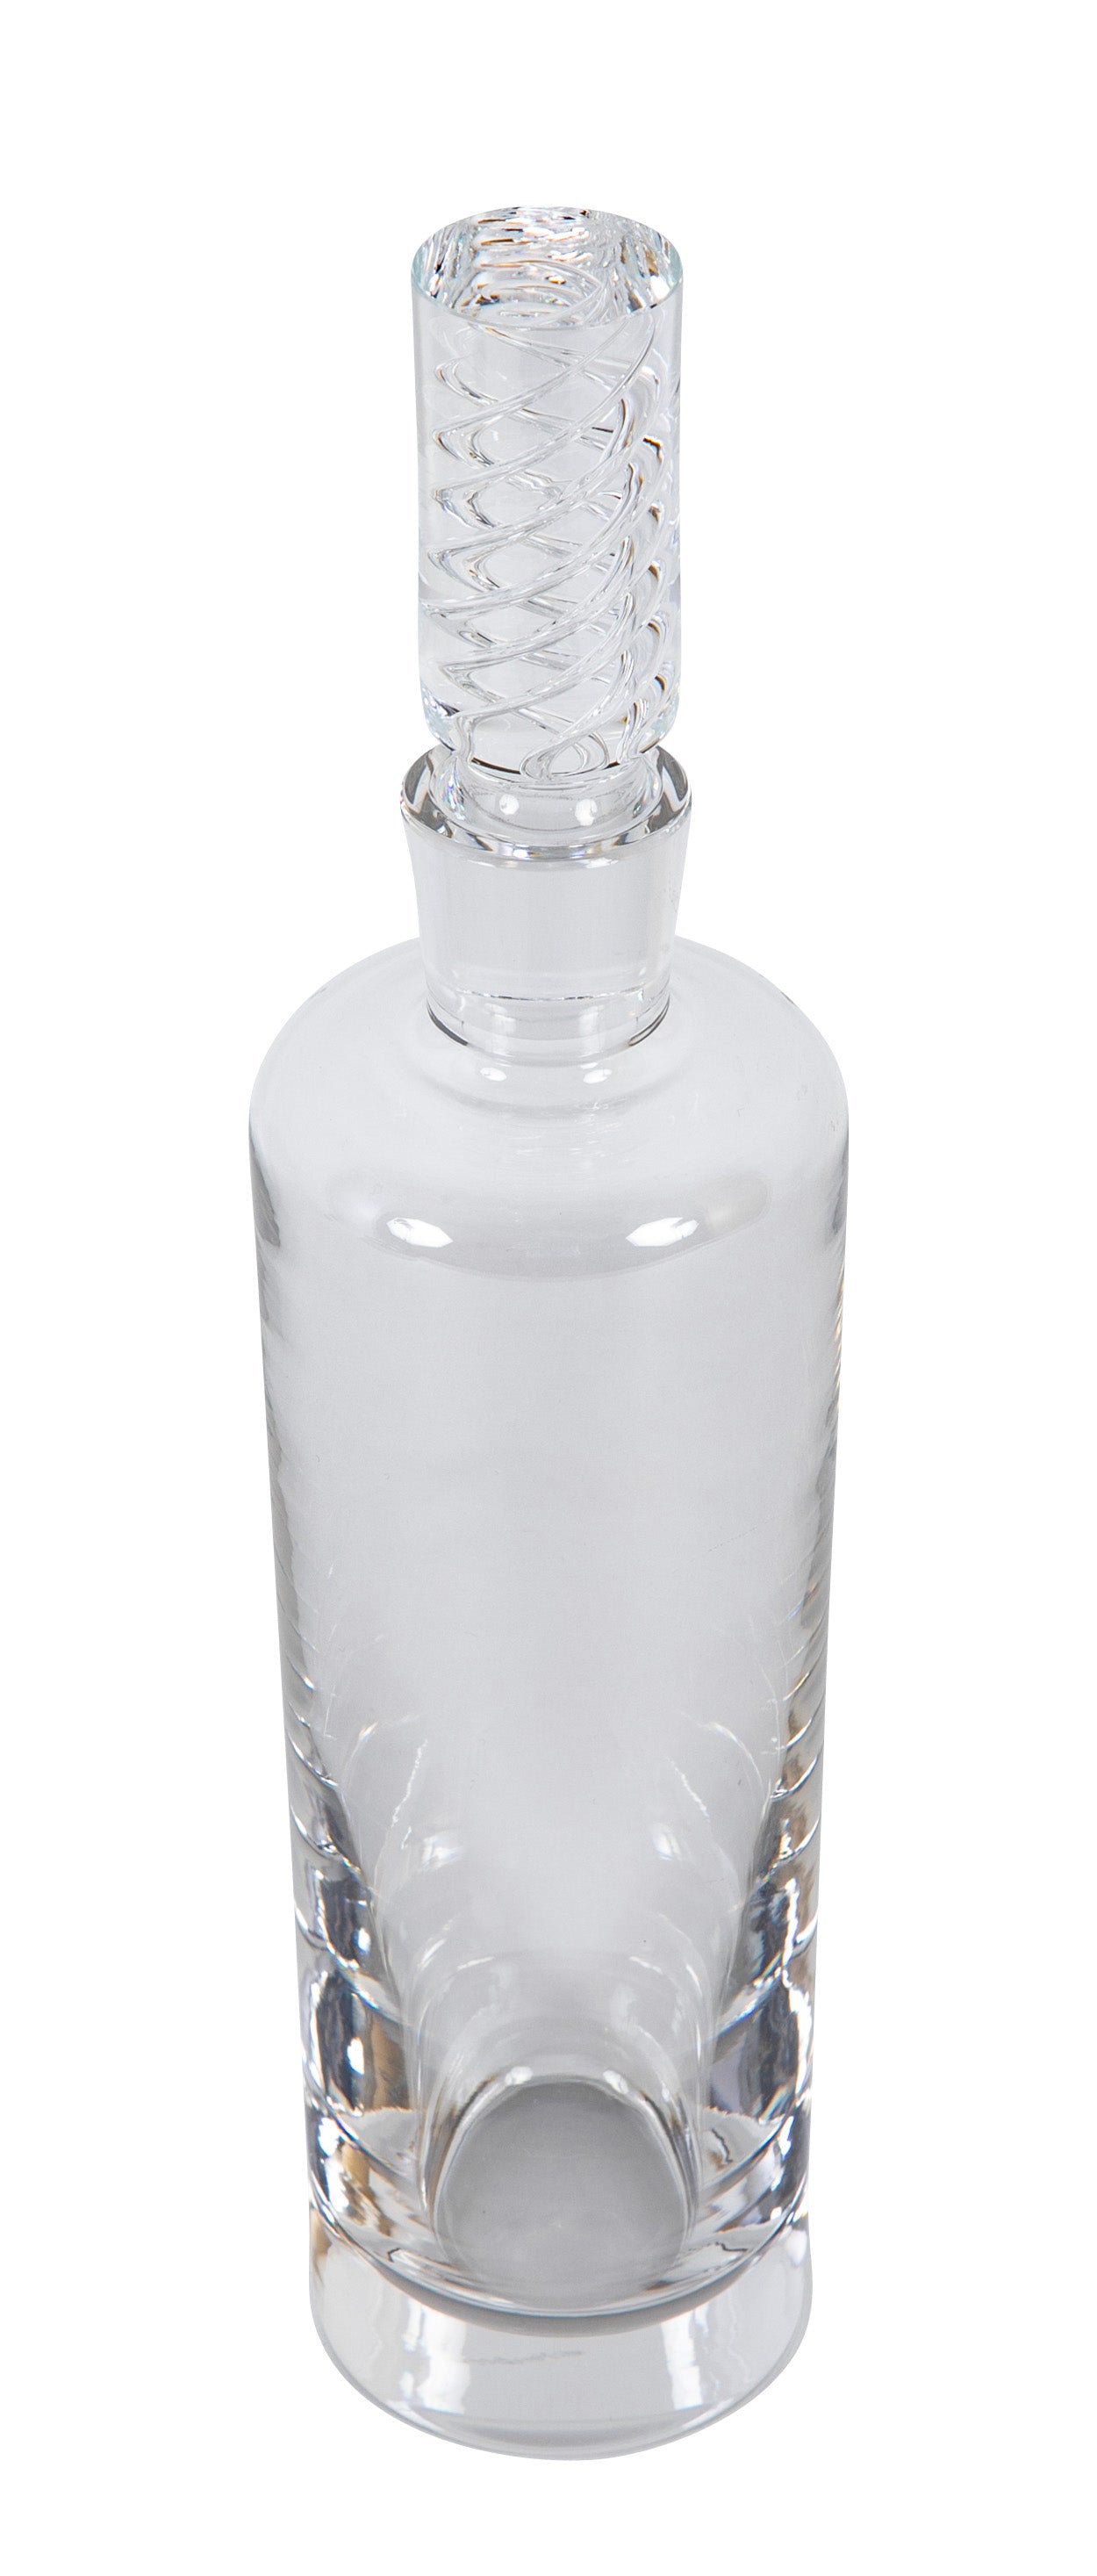 Steuben Crystal Decanter with "Air Twist" Stopper